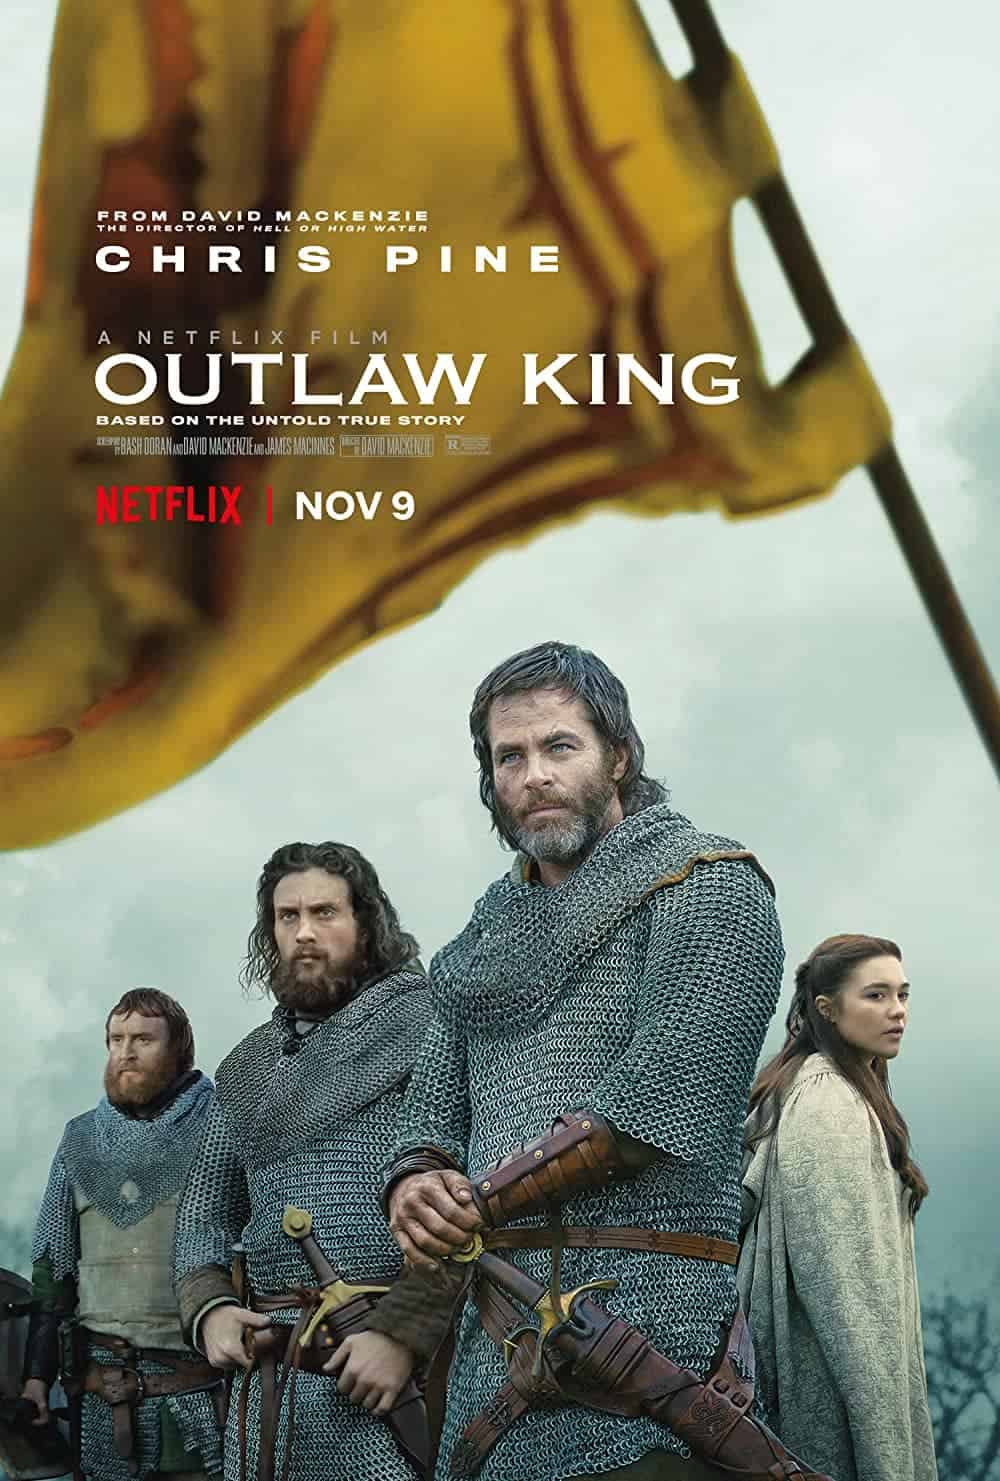 Outlaw King (2018) Best Knight Movies to Add in Your Watchlist